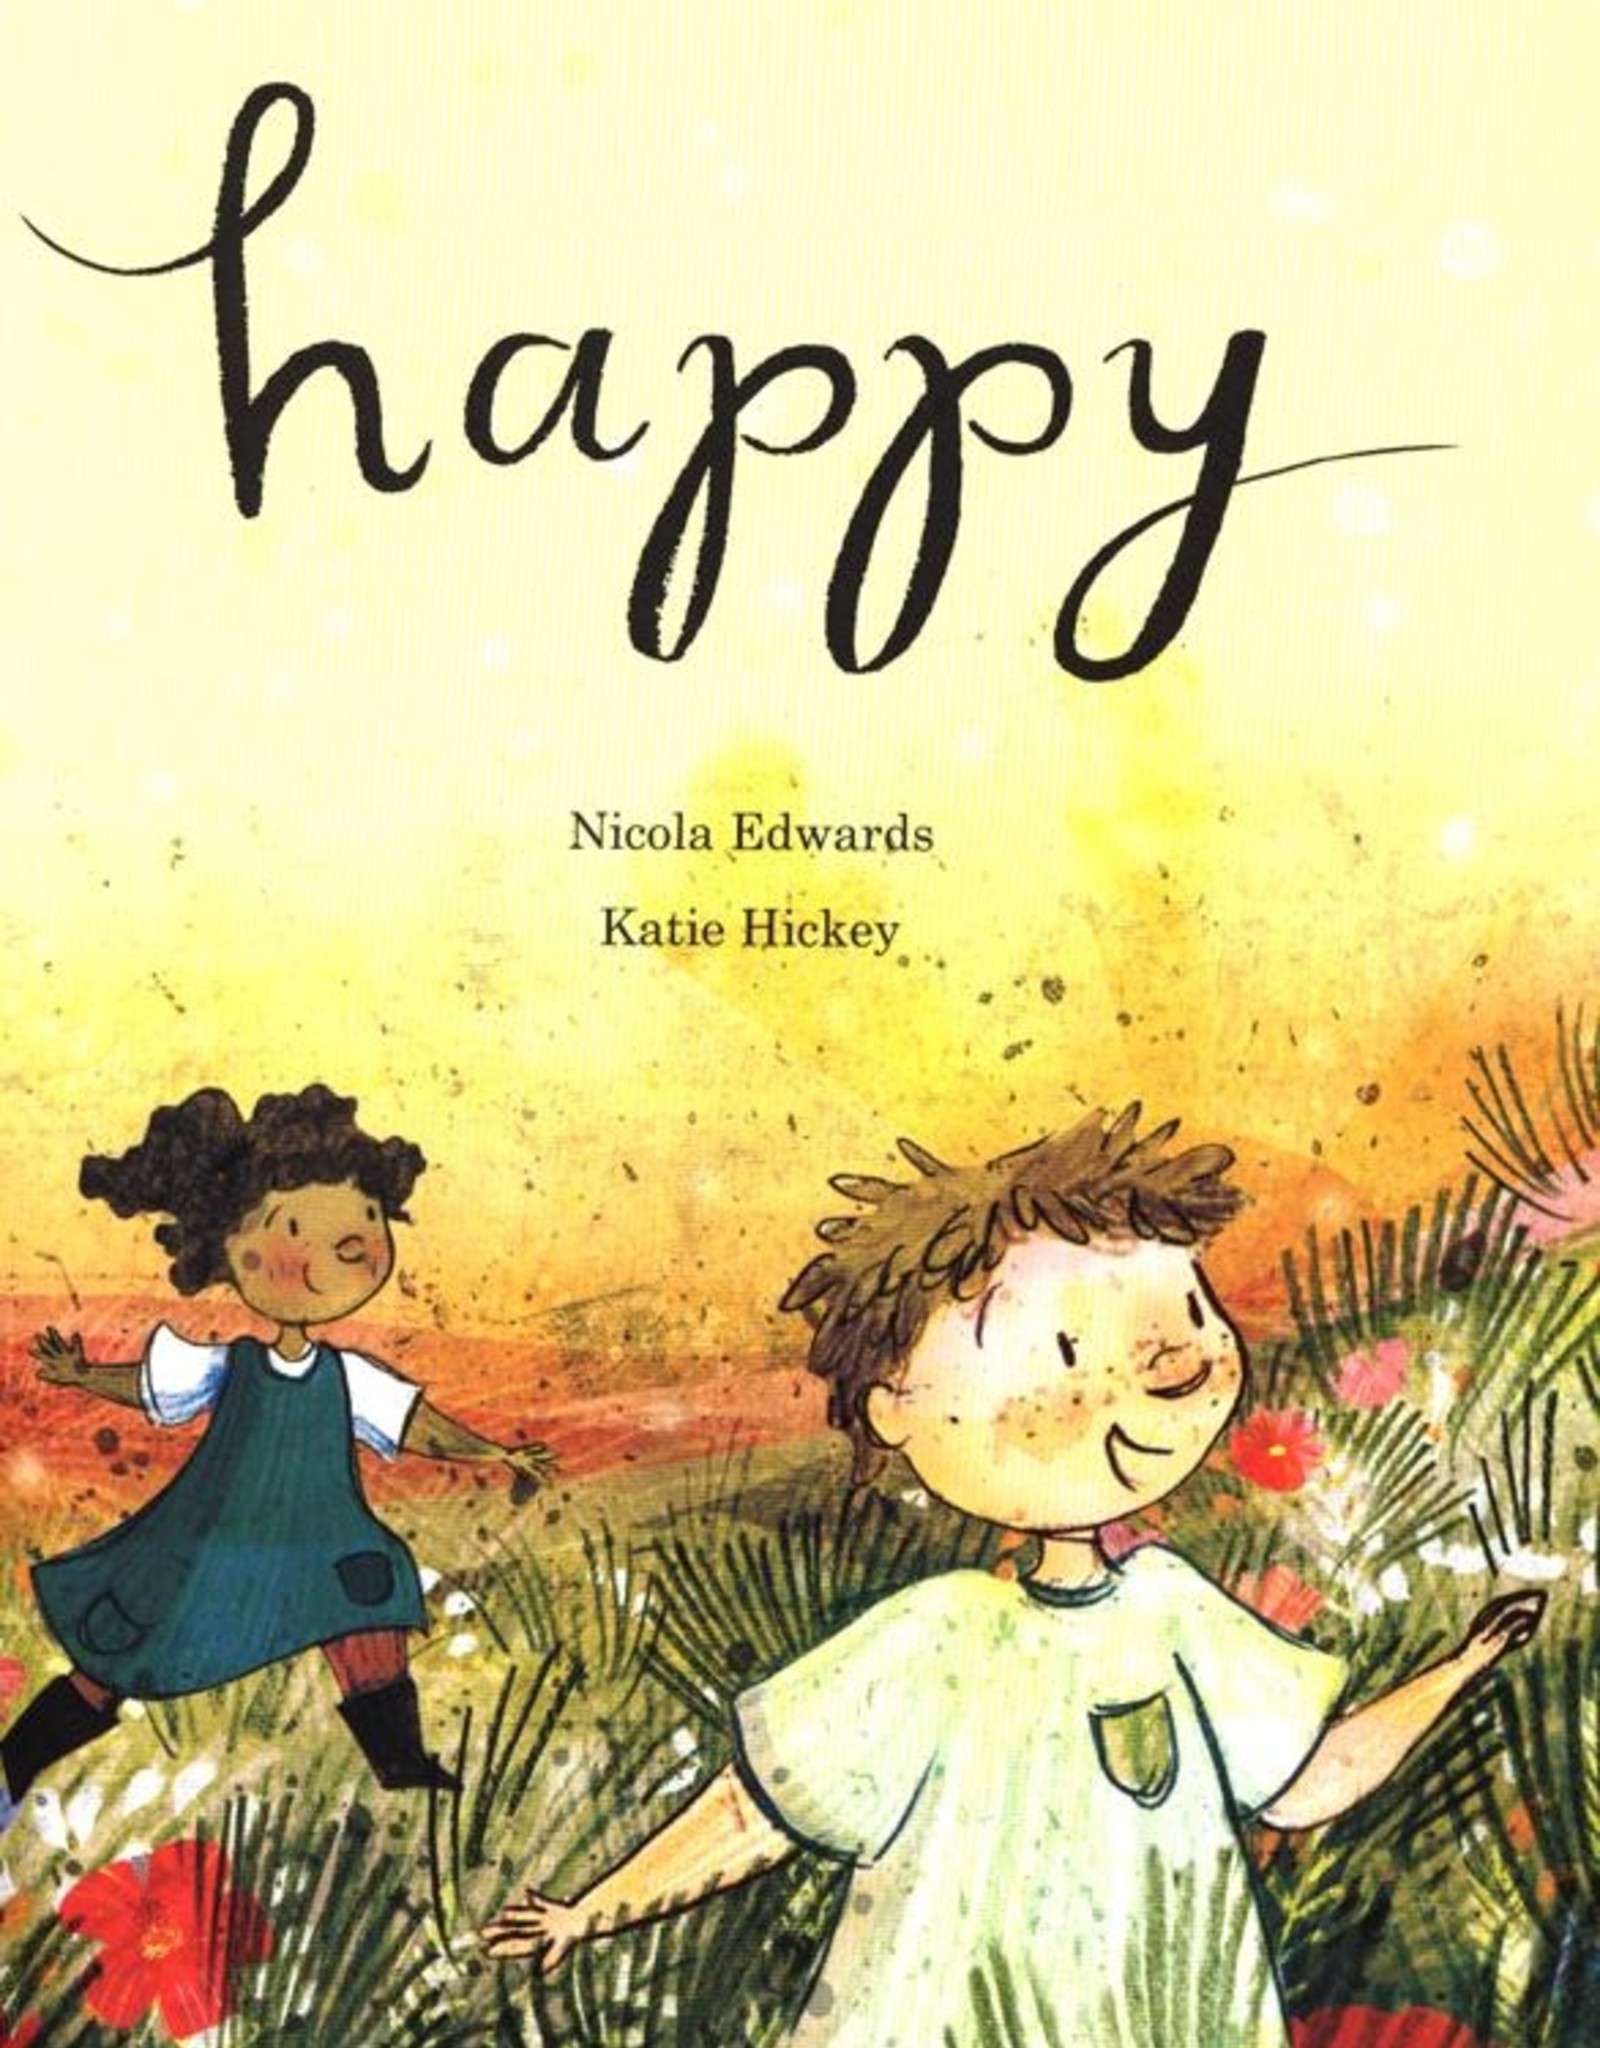 HAPPY: A CHILDRENS BOOK OF MINDFULNESS